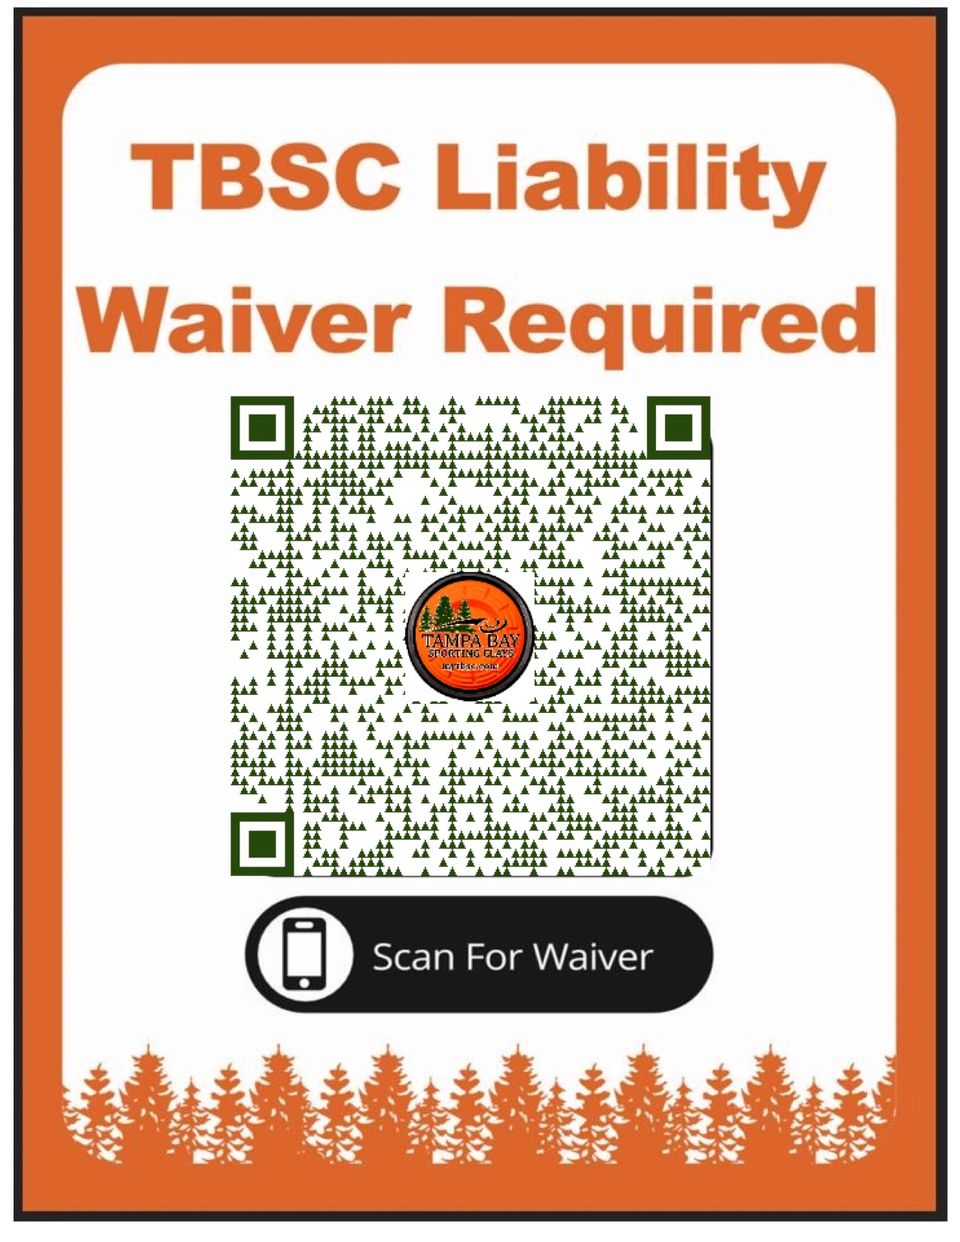 Event waiver qr code sign